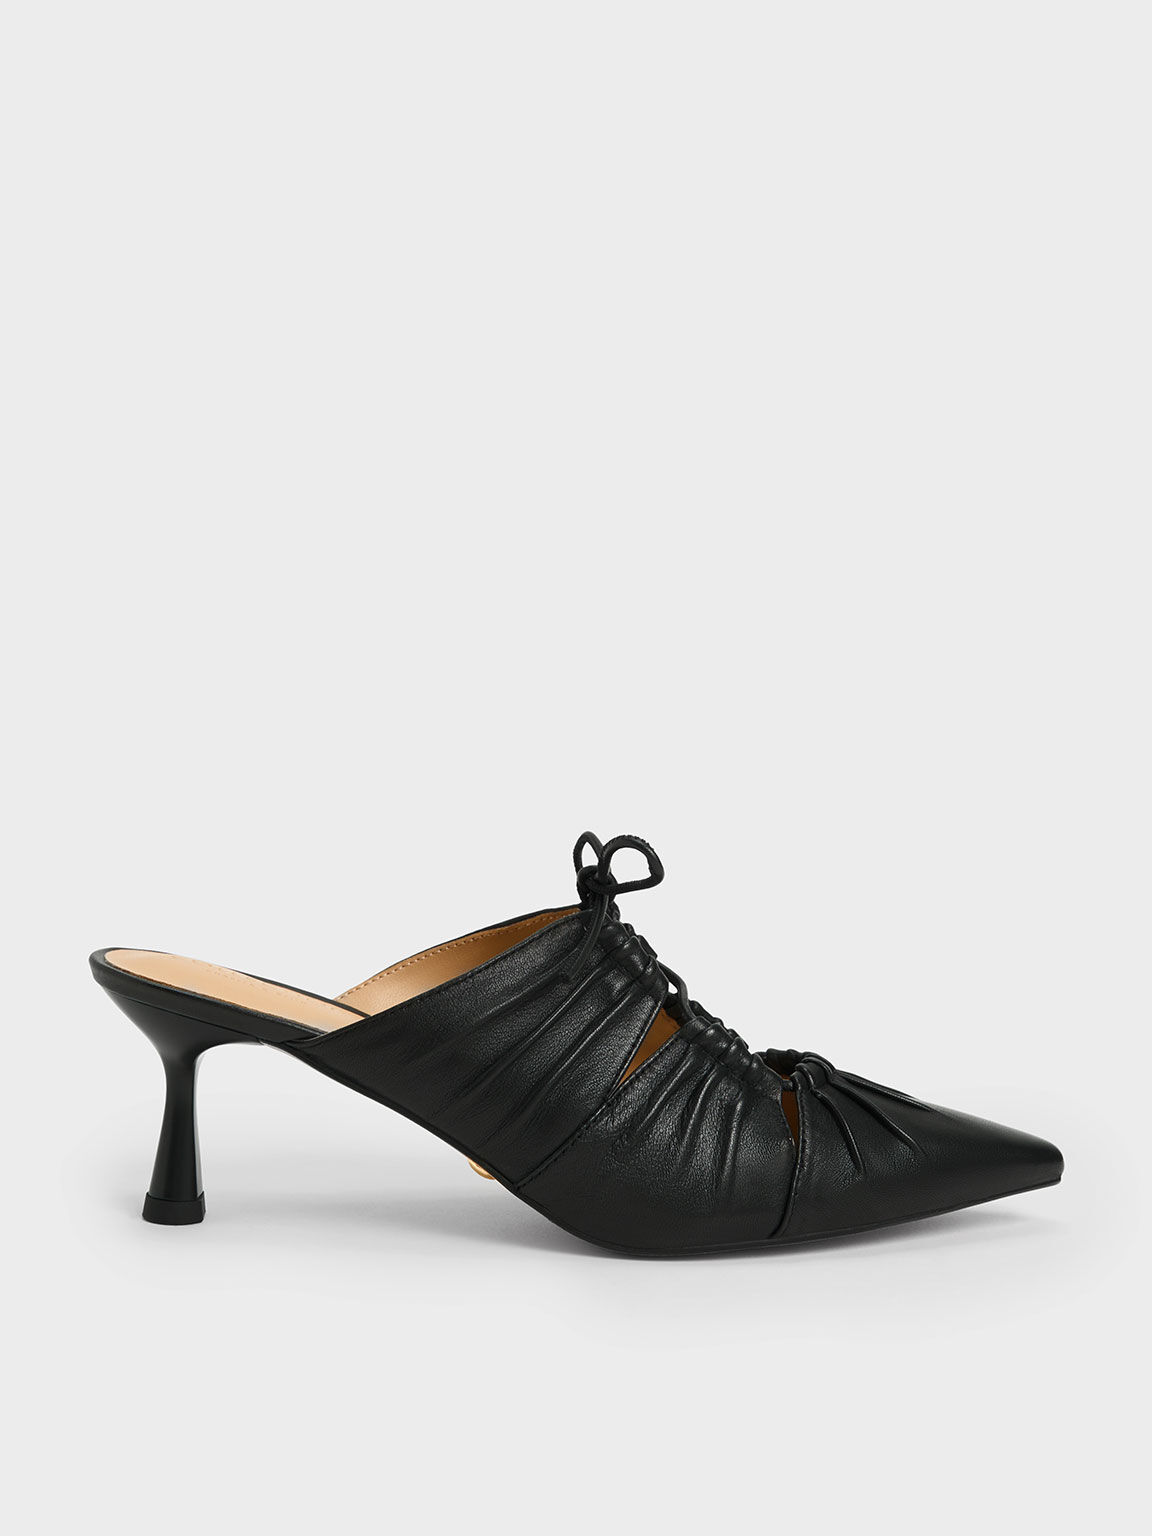 Landis Leather Ruched Bow-Tie Mules, Black, hi-res